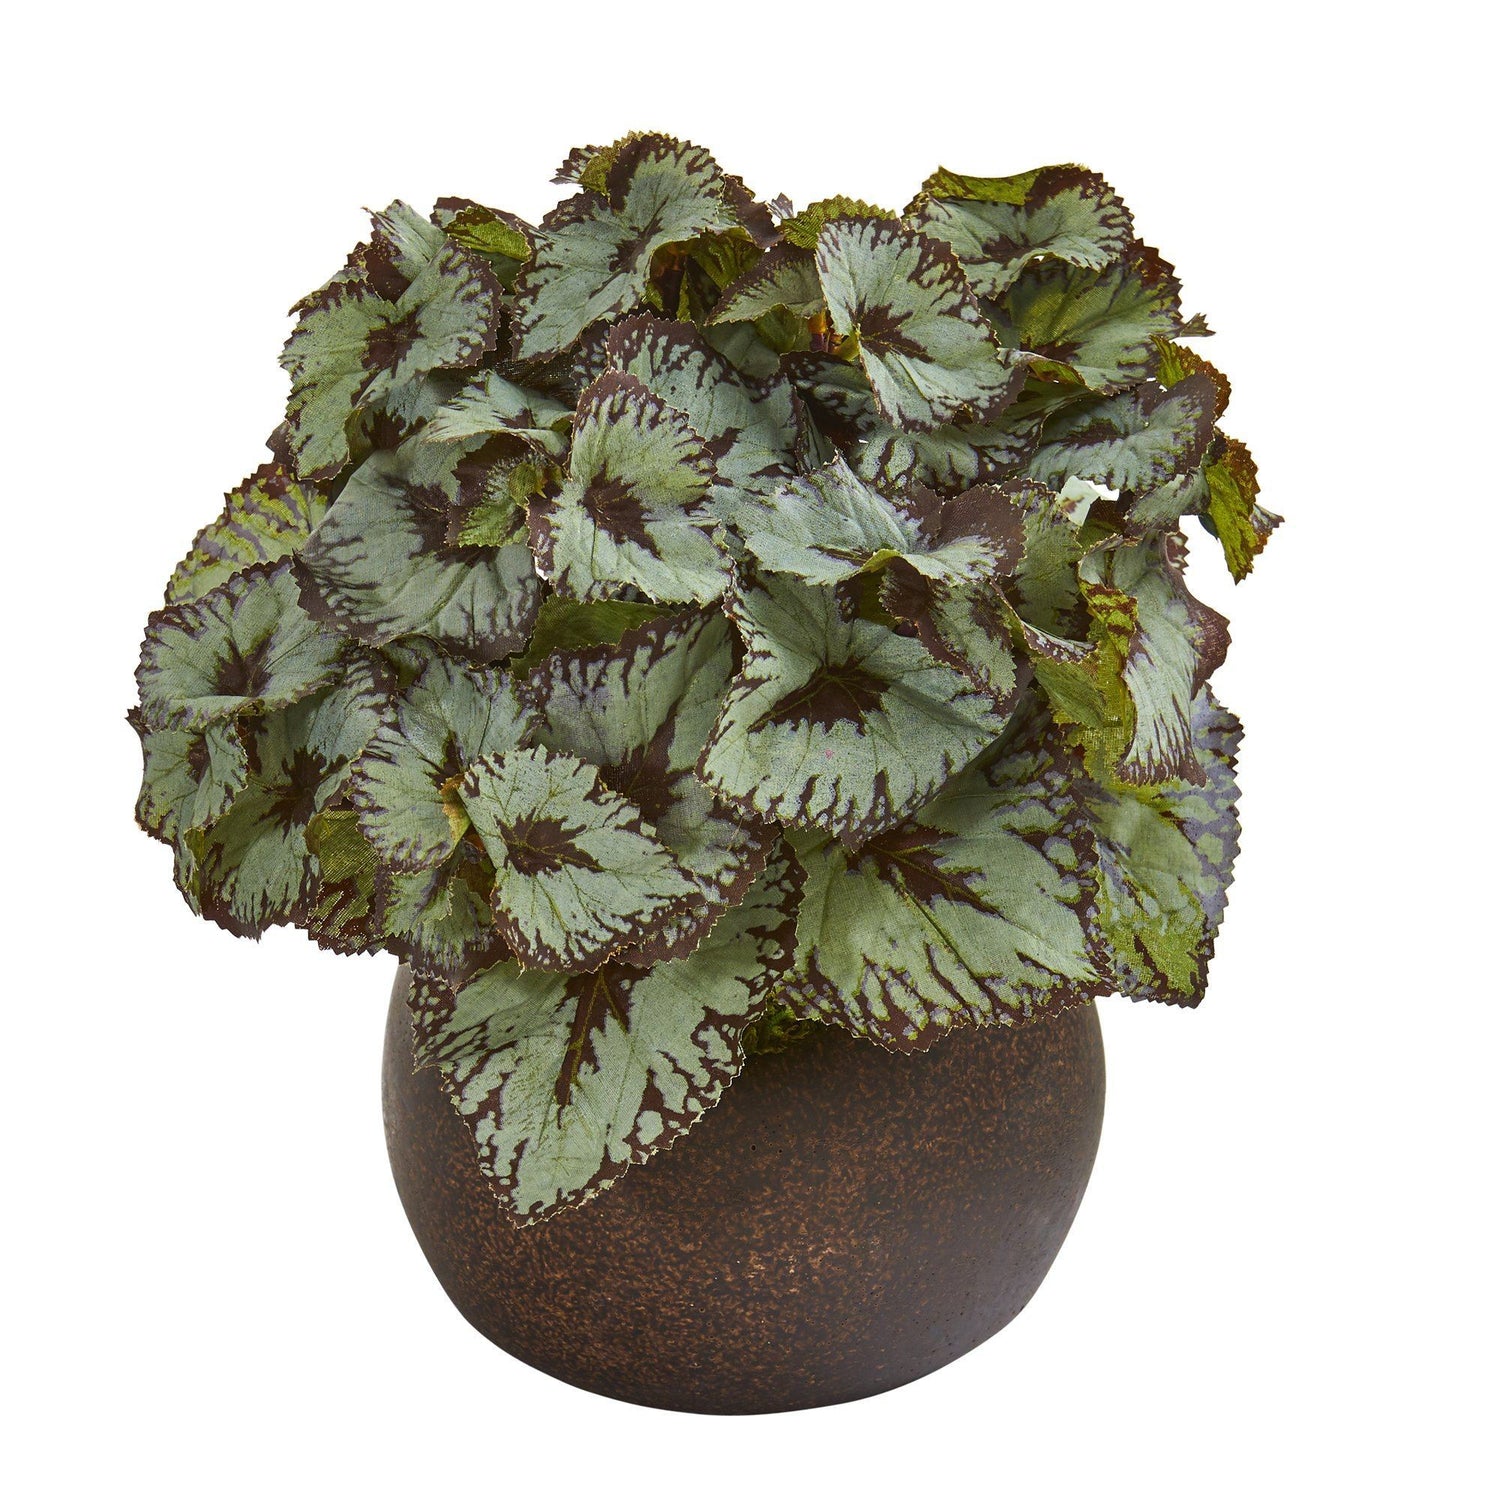 10” Rex Begonia Artificial Plant in Stone Planter